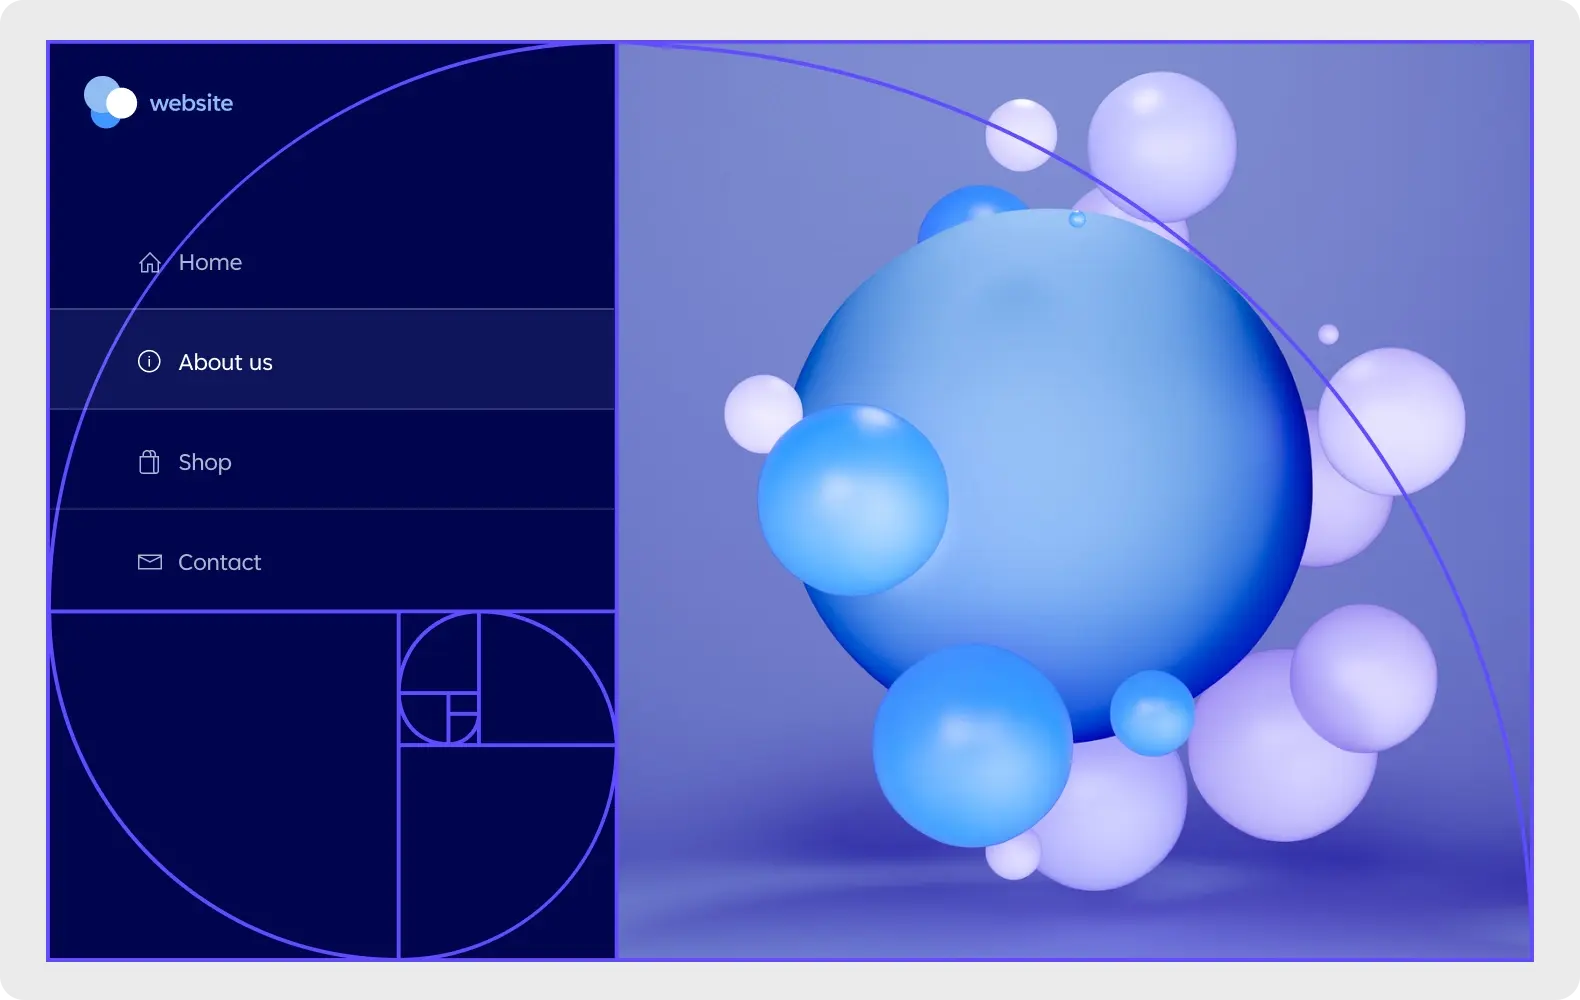 A website with design that features carefully constructed negative space that aligns to the golden ratio.